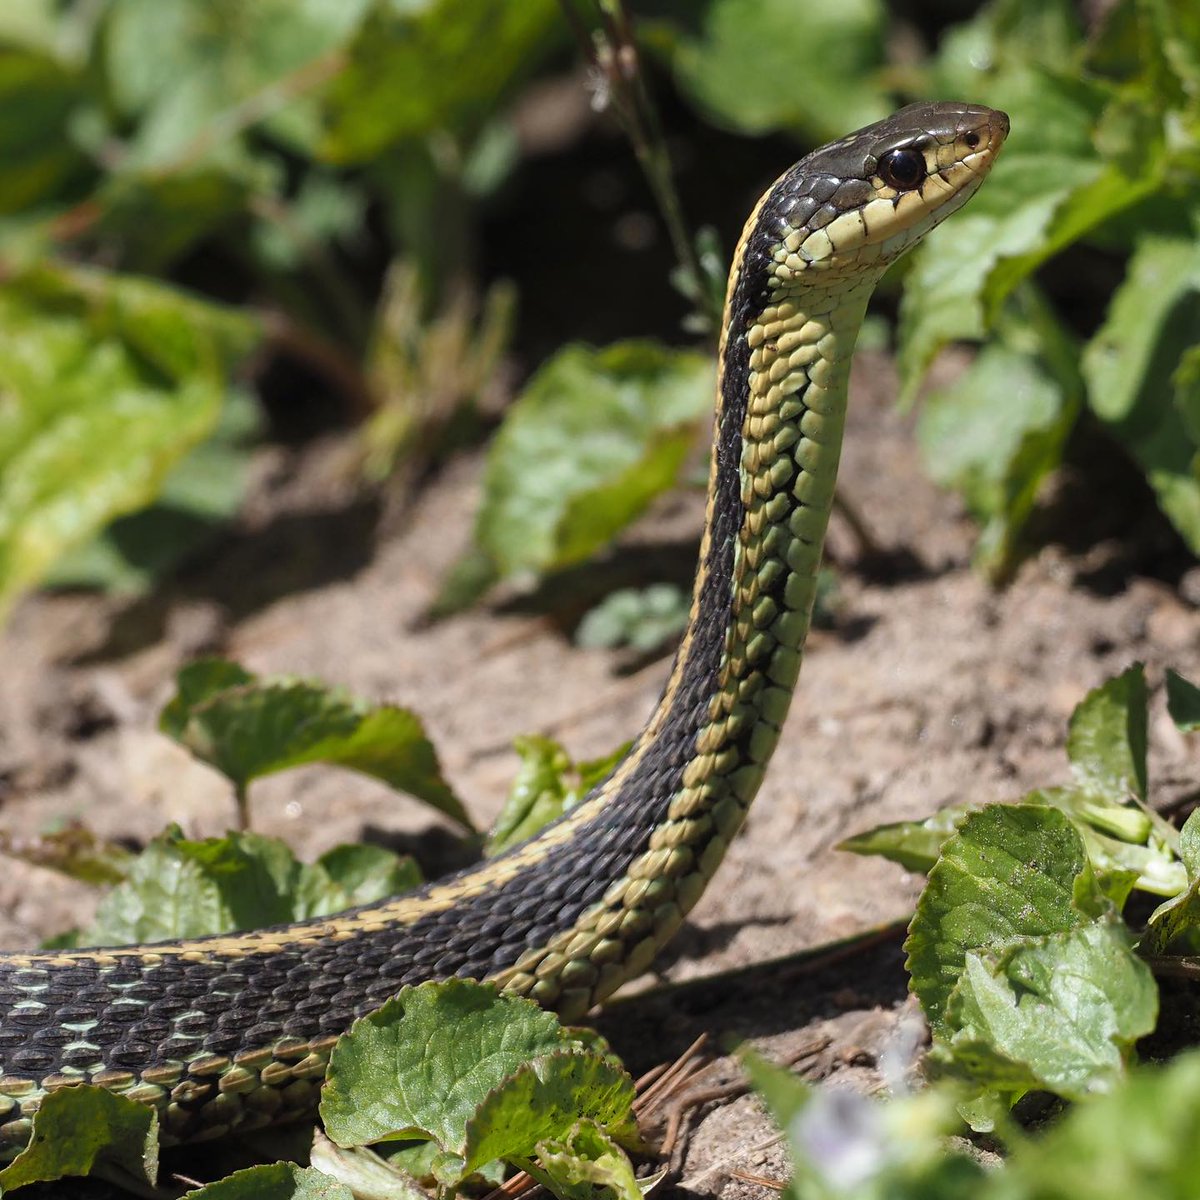 One measure of success for any wildlife garden is the presence of predators. This Eastern Garter Snake was seen feeding in the Native Plants Garden of the Gosling Wildlife Gardens at the Arboretum! More info: instagram.com/p/C6PDWs5JbBi/… 📷Chris Earley #UoGArboretum #UofG #Guelph